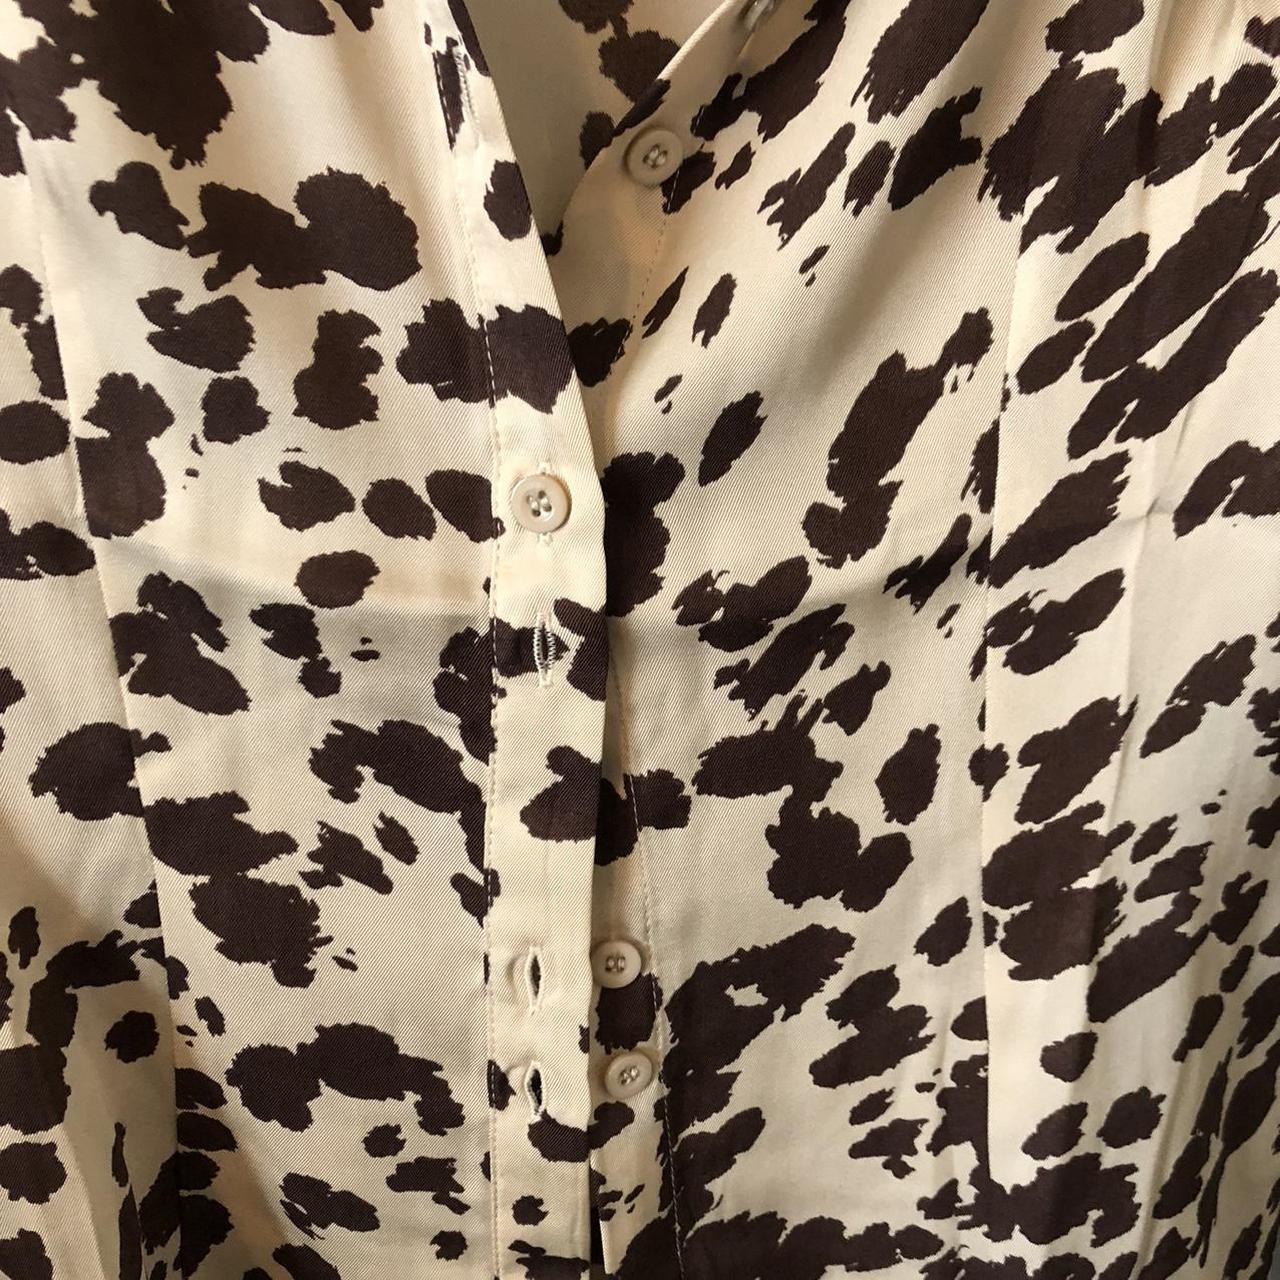 Product Image 2 - Vintage printed button up

#vintage #printed